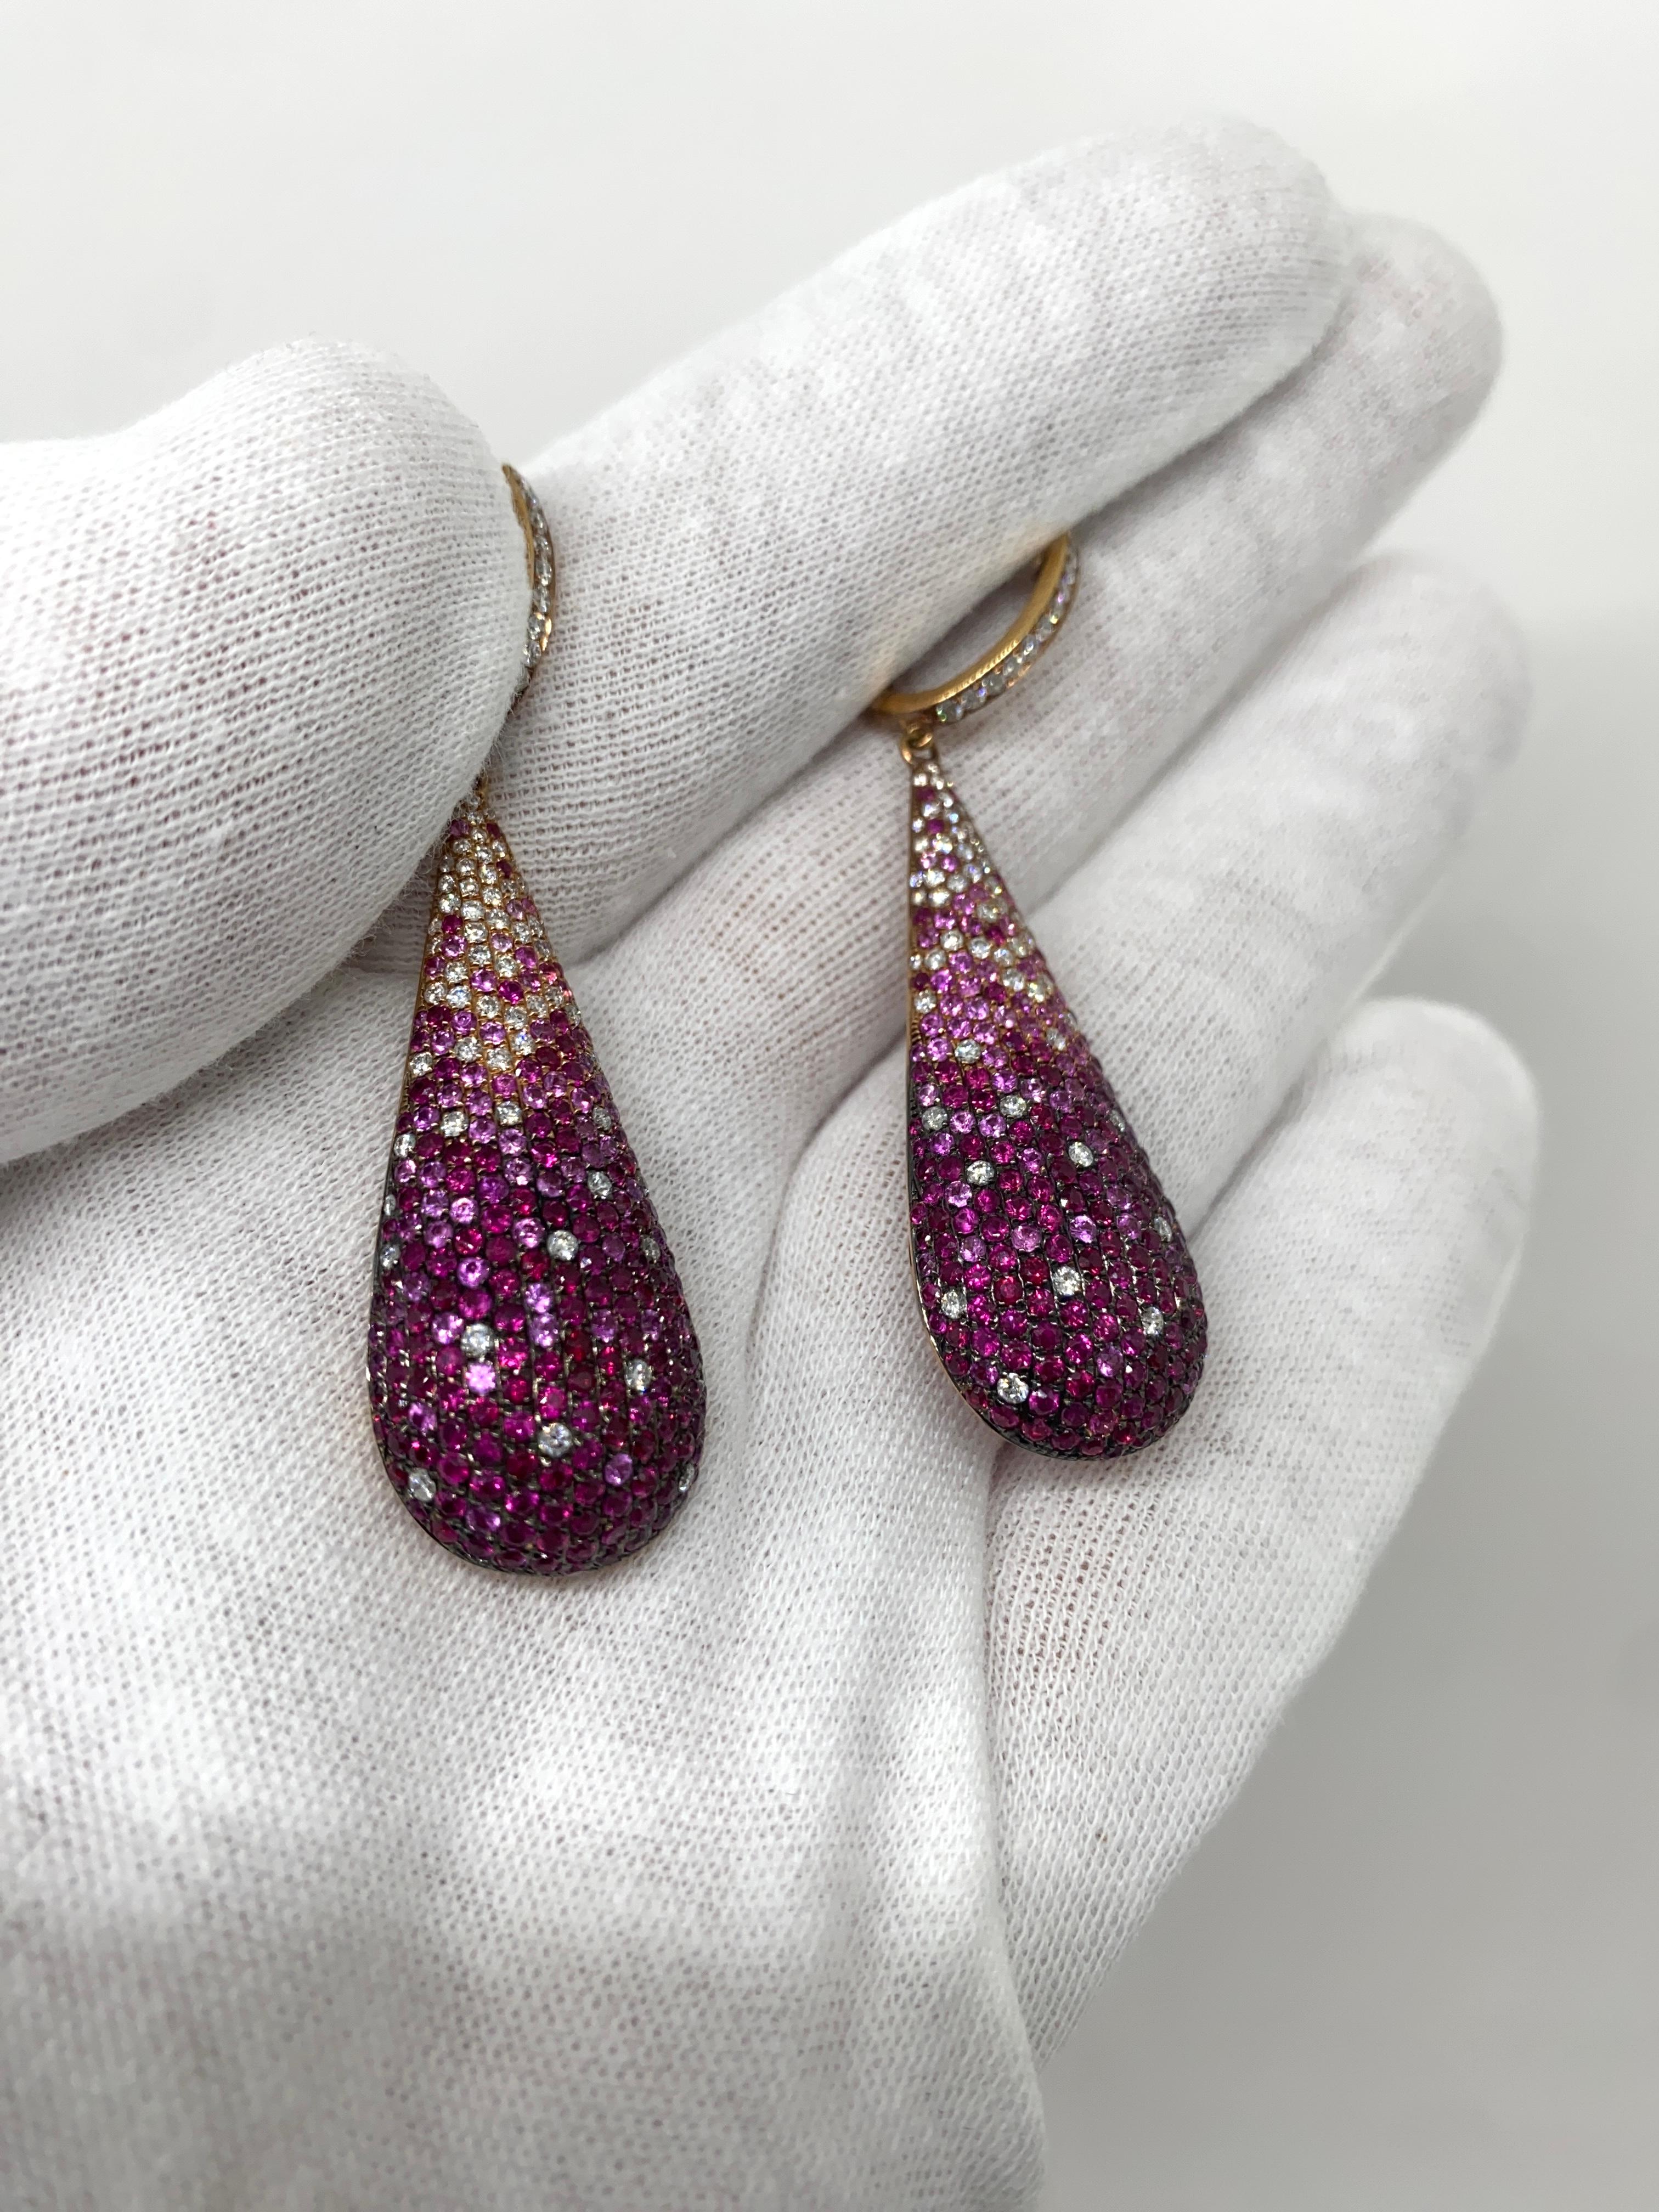 Brilliant Cut 18kt Rose Gold Stunning Drop Earrings 4.13ct Rubies 1.82ct Sapphires & Diamond For Sale